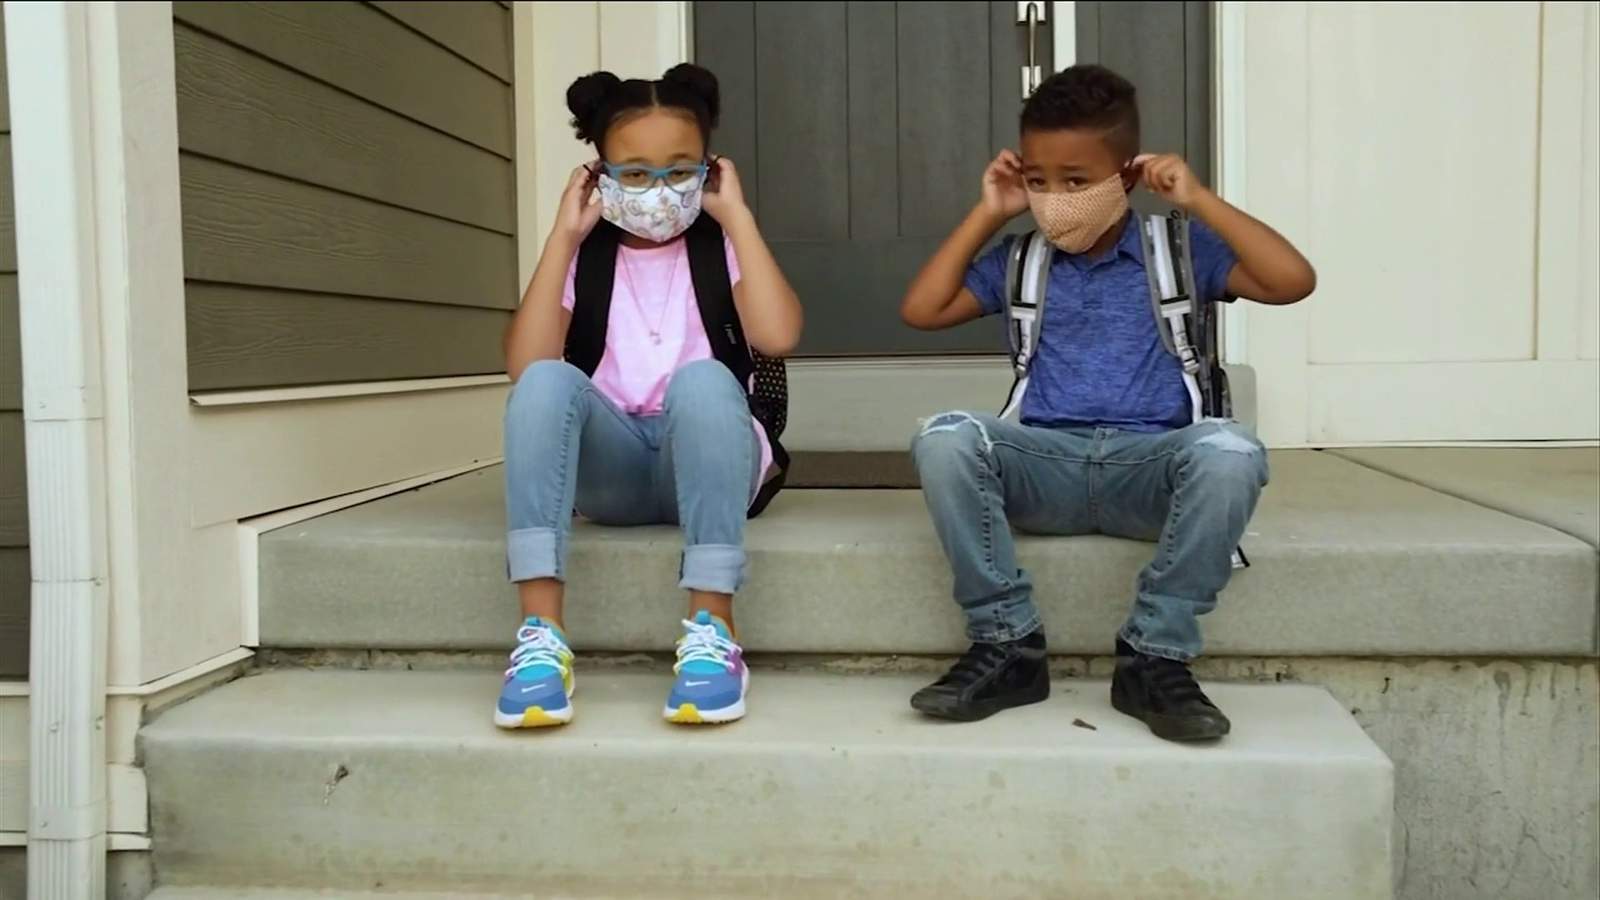 Pandemic sent 210K more children in Florida into poverty, records show